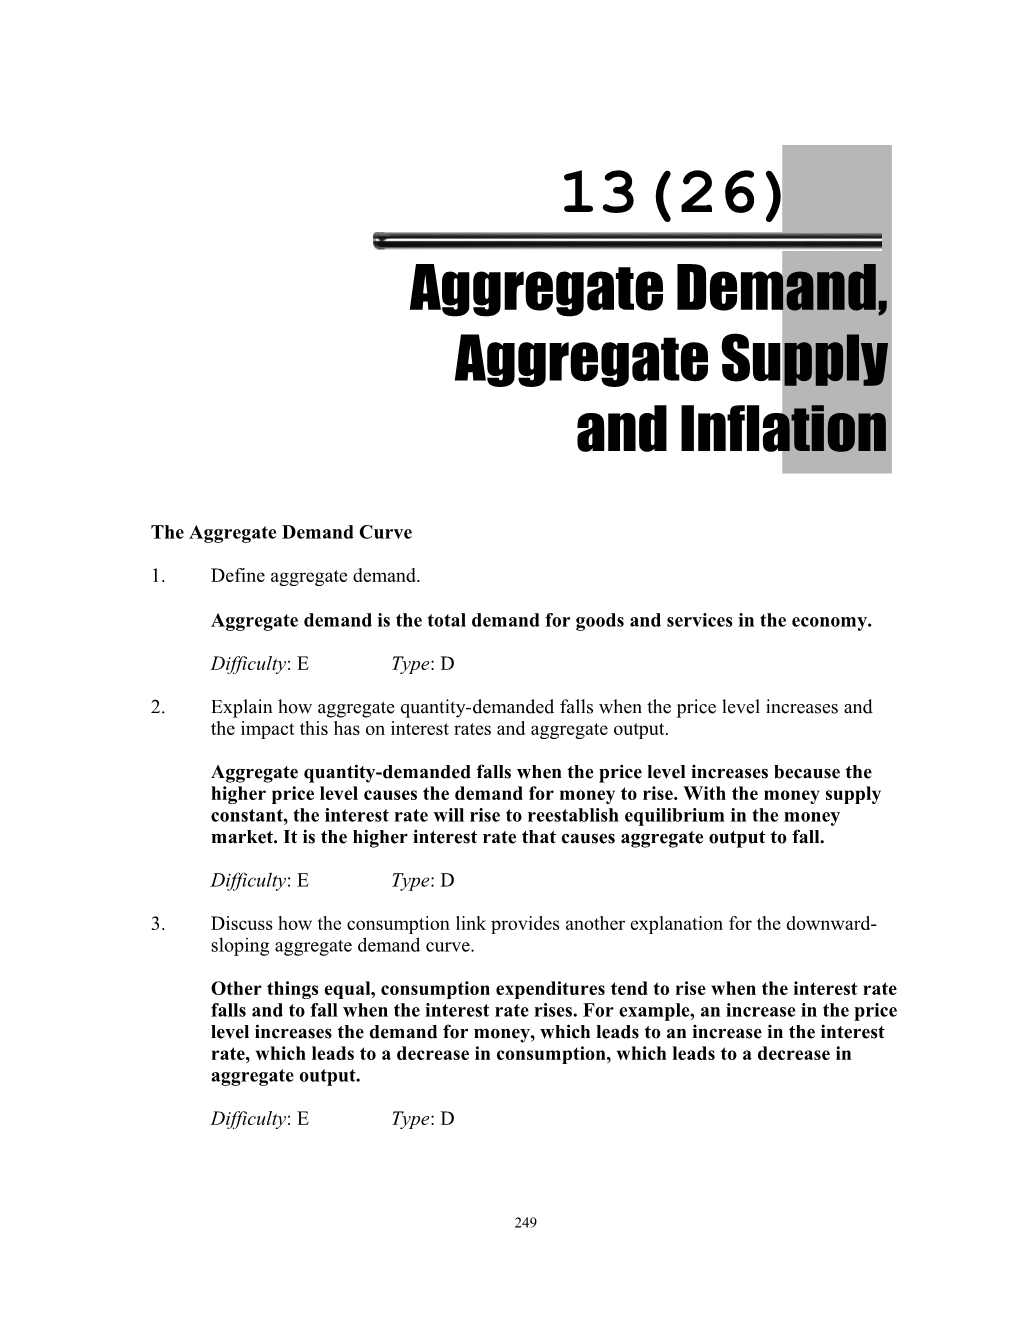 Chapter 13 (26): Aggregate Demand, Aggregate Supply, and Inflation